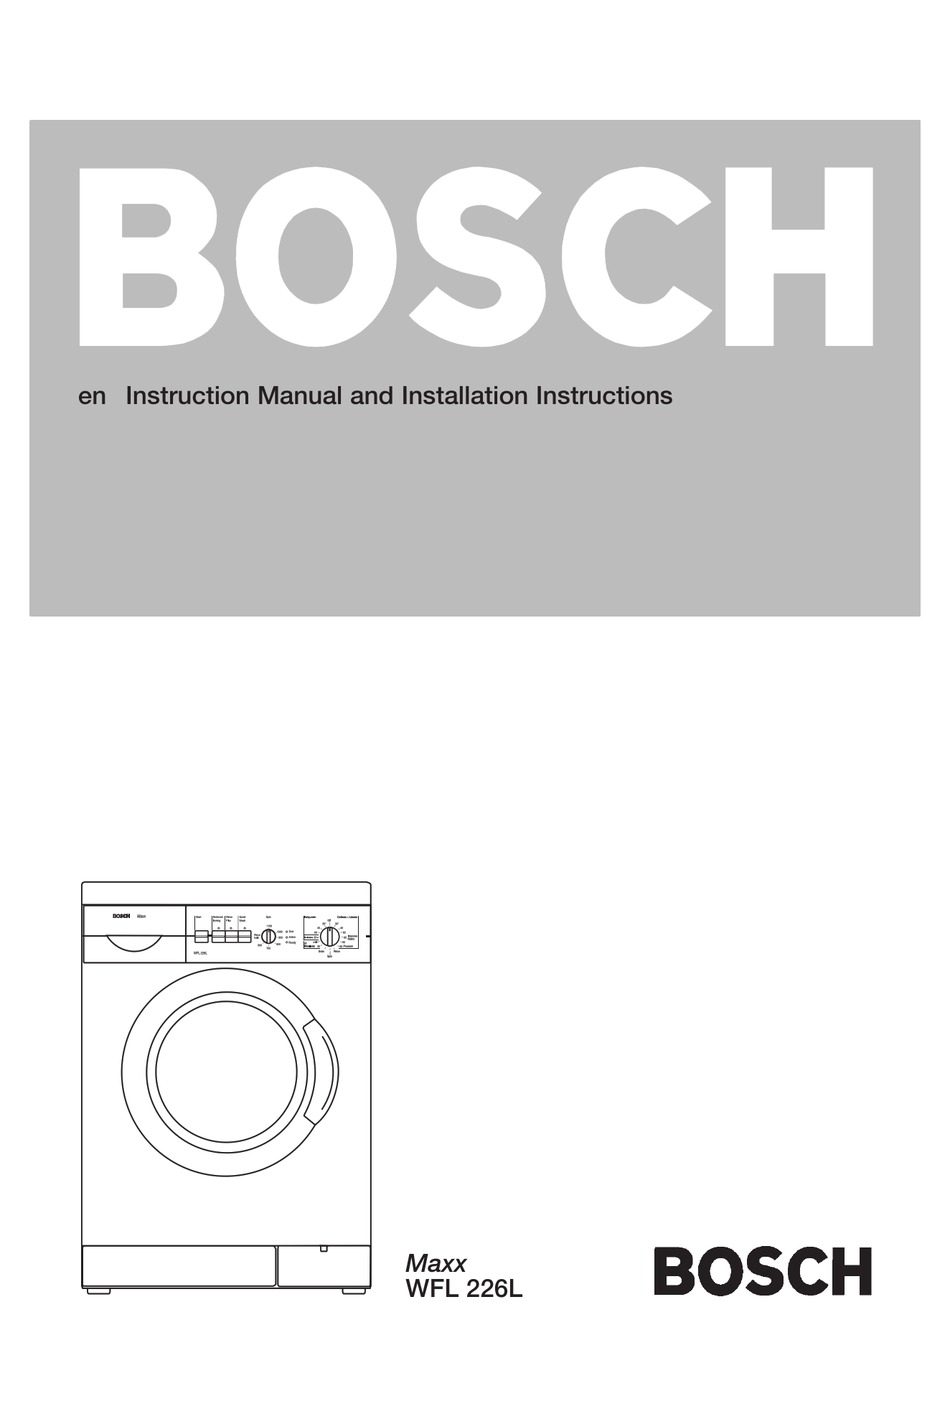 animation Discover Southwest BOSCH MAXX WFL 226L INSTRUCTION MANUAL AND INSTALLATION INSTRUCTIONS Pdf  Download | ManualsLib